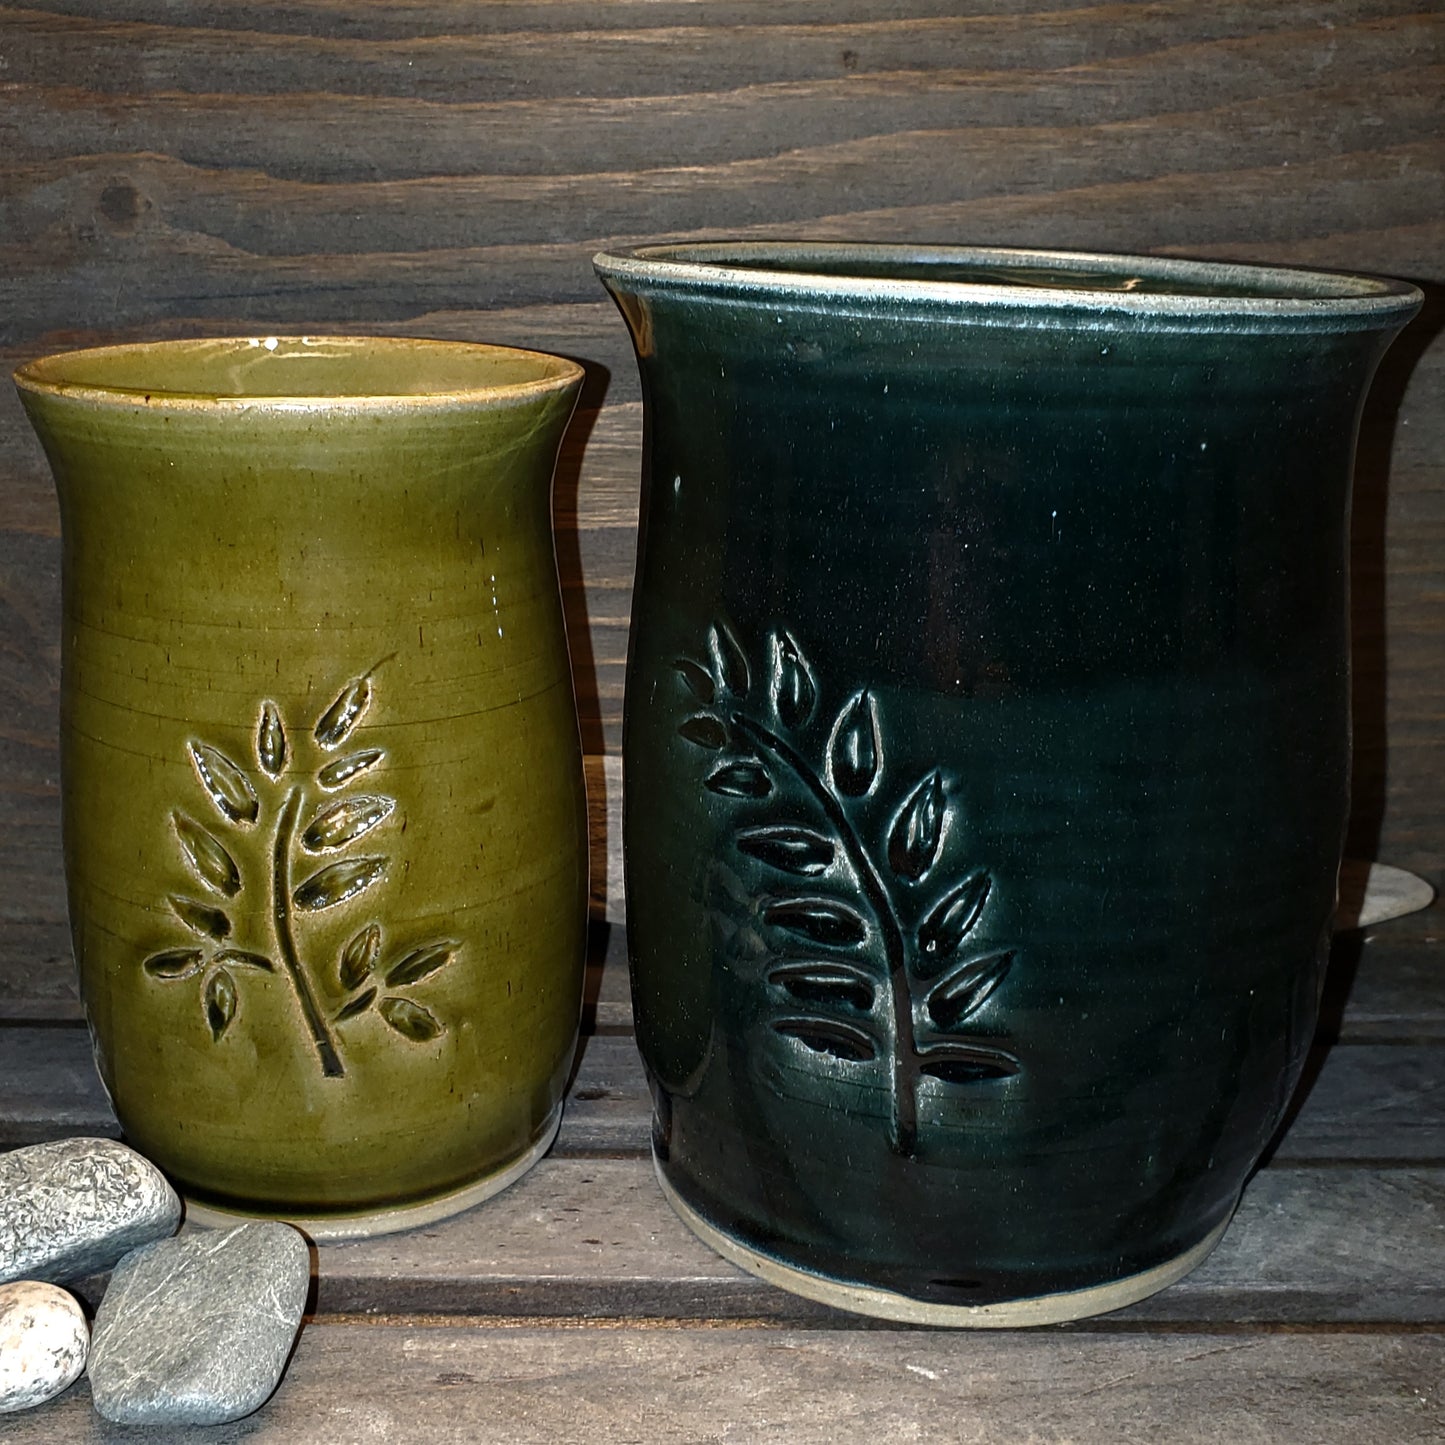 Flower Vase with Carved Leaves - Green Cabin Pottery